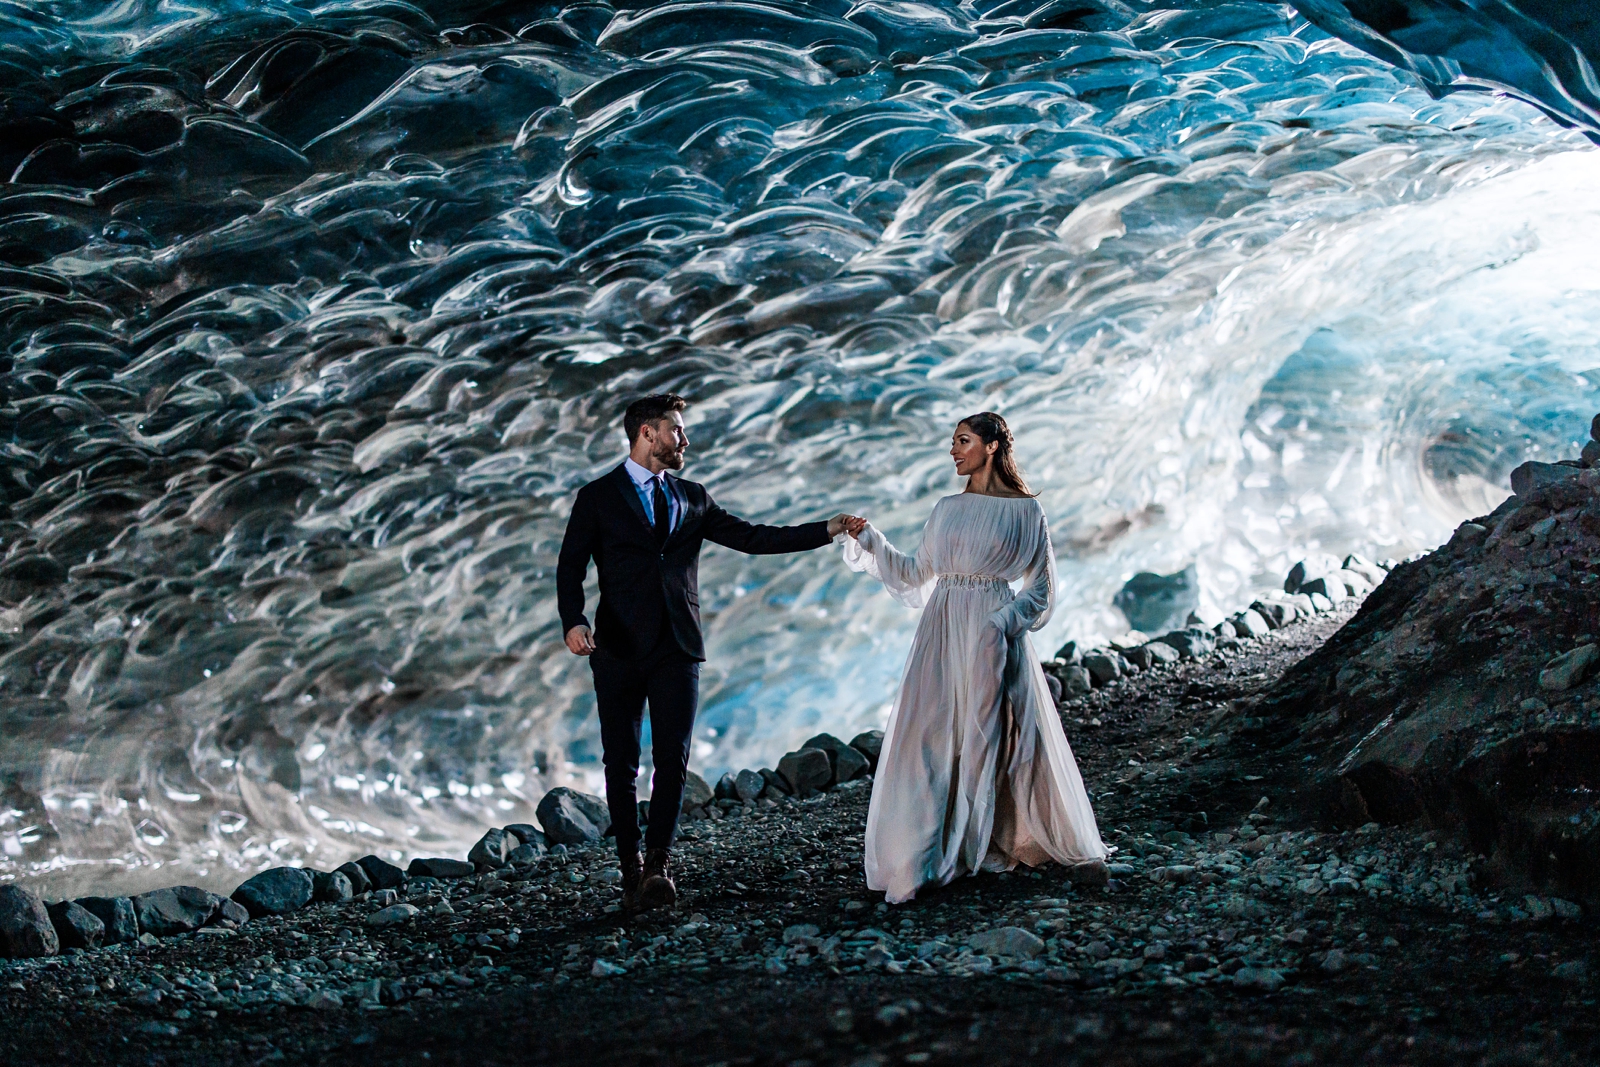 This bride and groom walk in a winter wonderland during their Iceland wedding day.